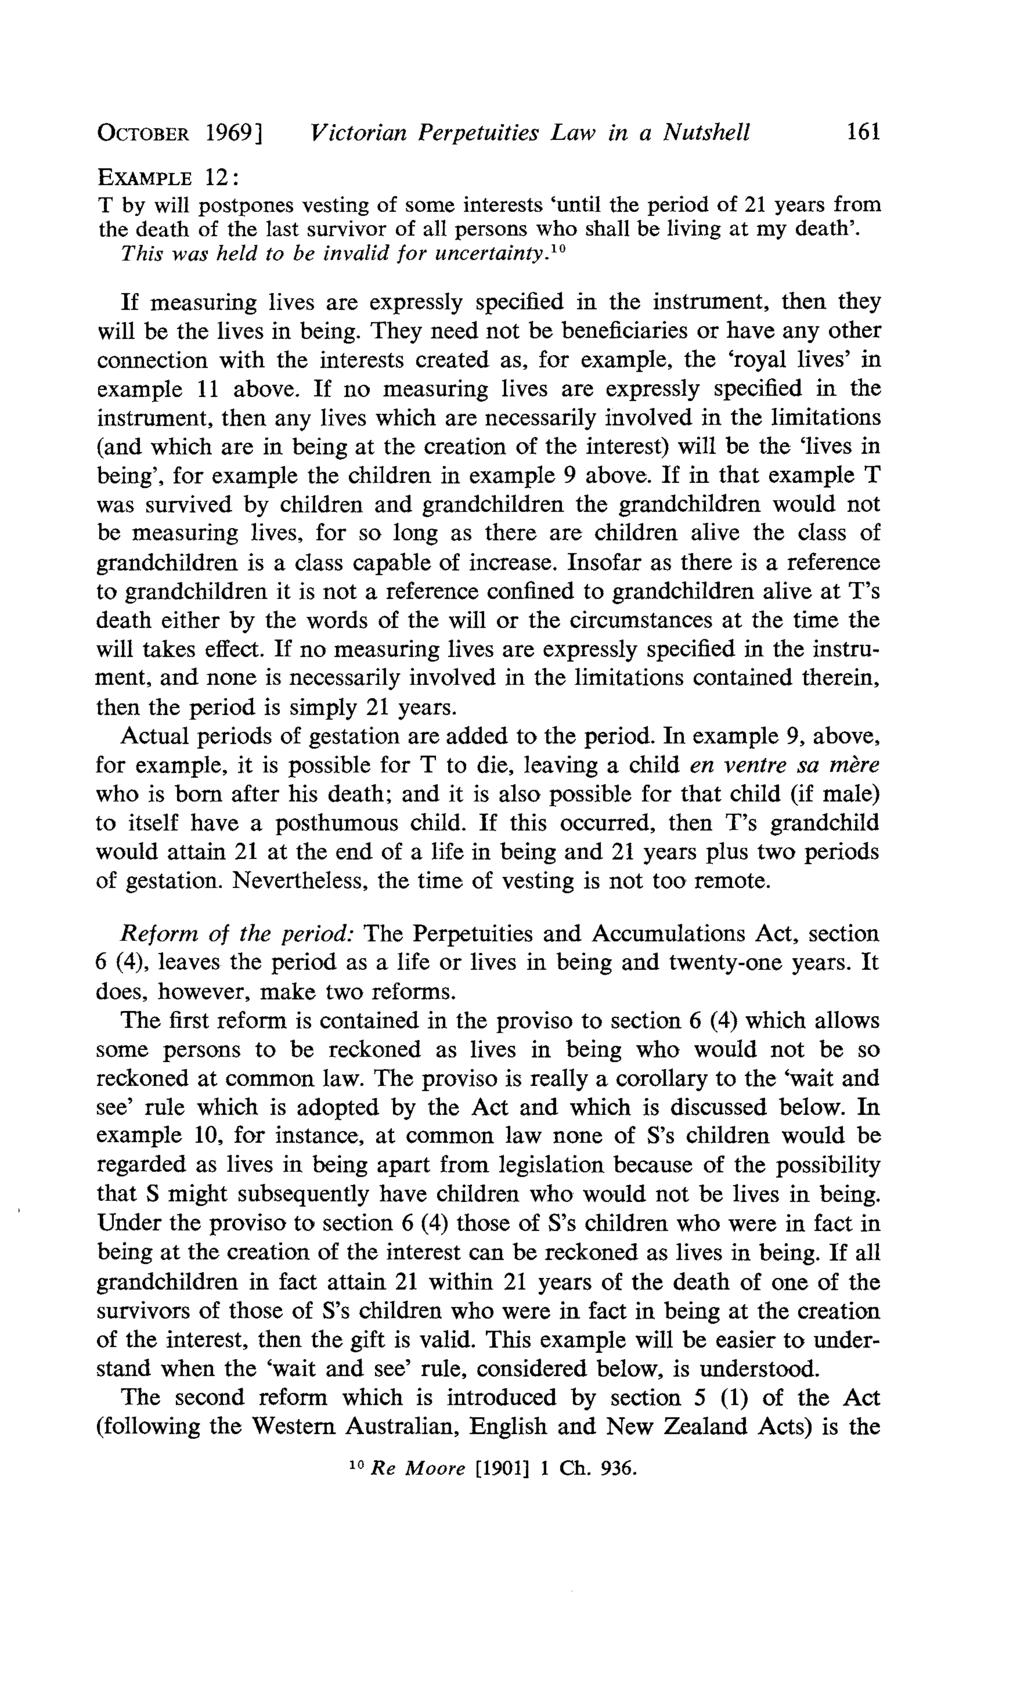 OCTOBER 1969] EXAMPLE 12: Victorian Perpetuities Law in a Nutshell 161 T by will postpones vesting of some interests 'until the period of 21 years from the death of the last survivor of all persons